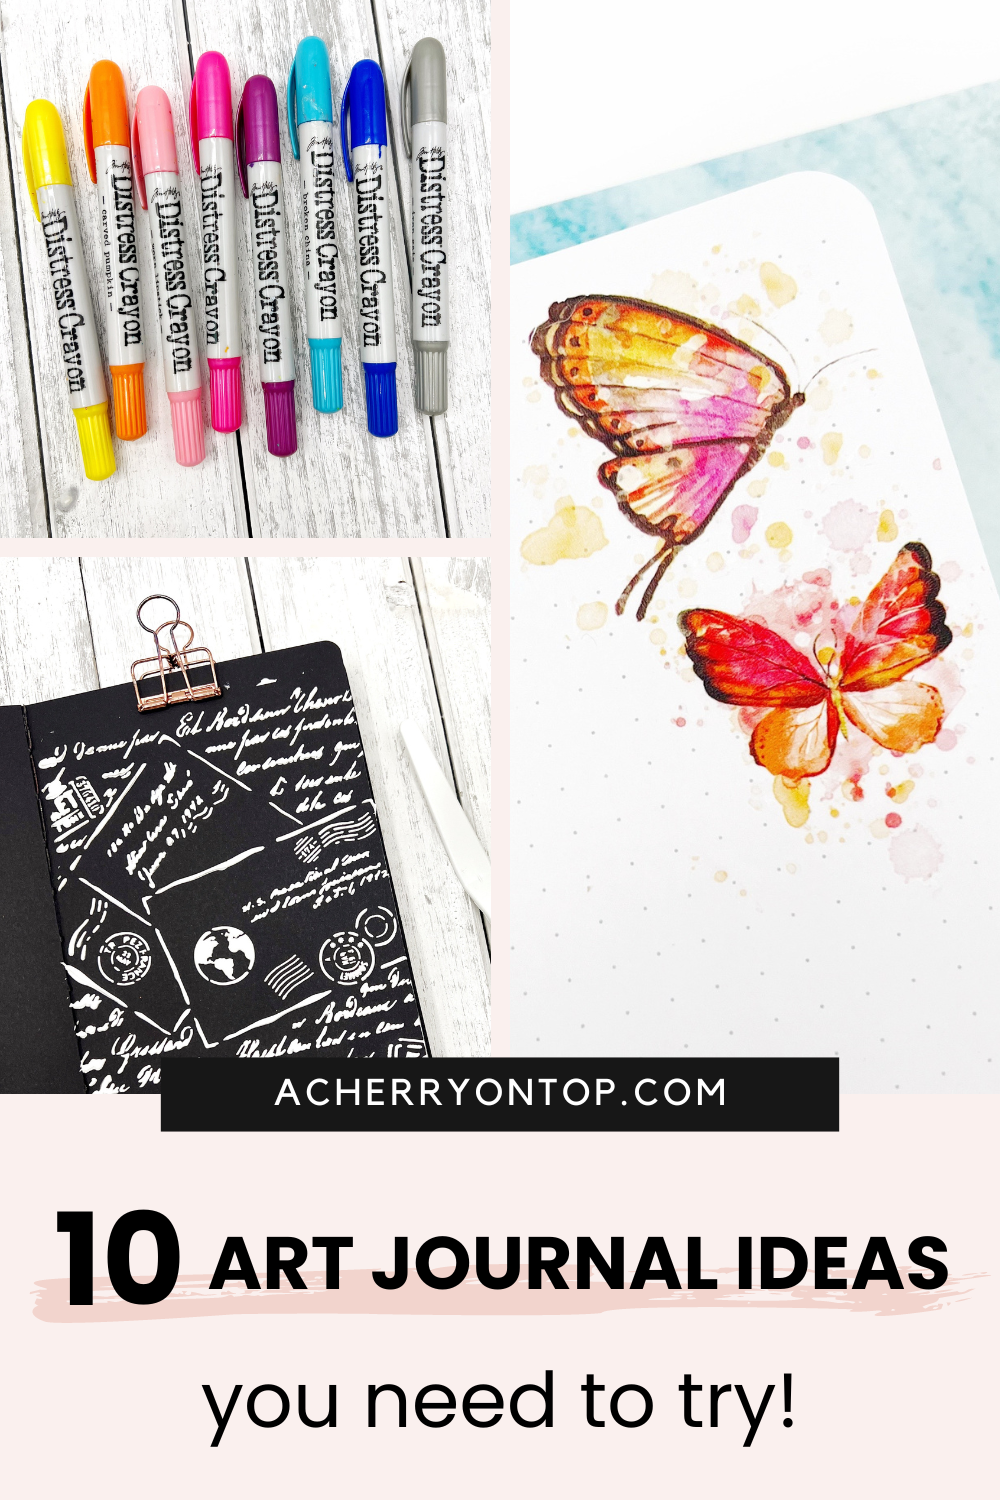 Art journaling with oil pastels - use your art supplies challenge